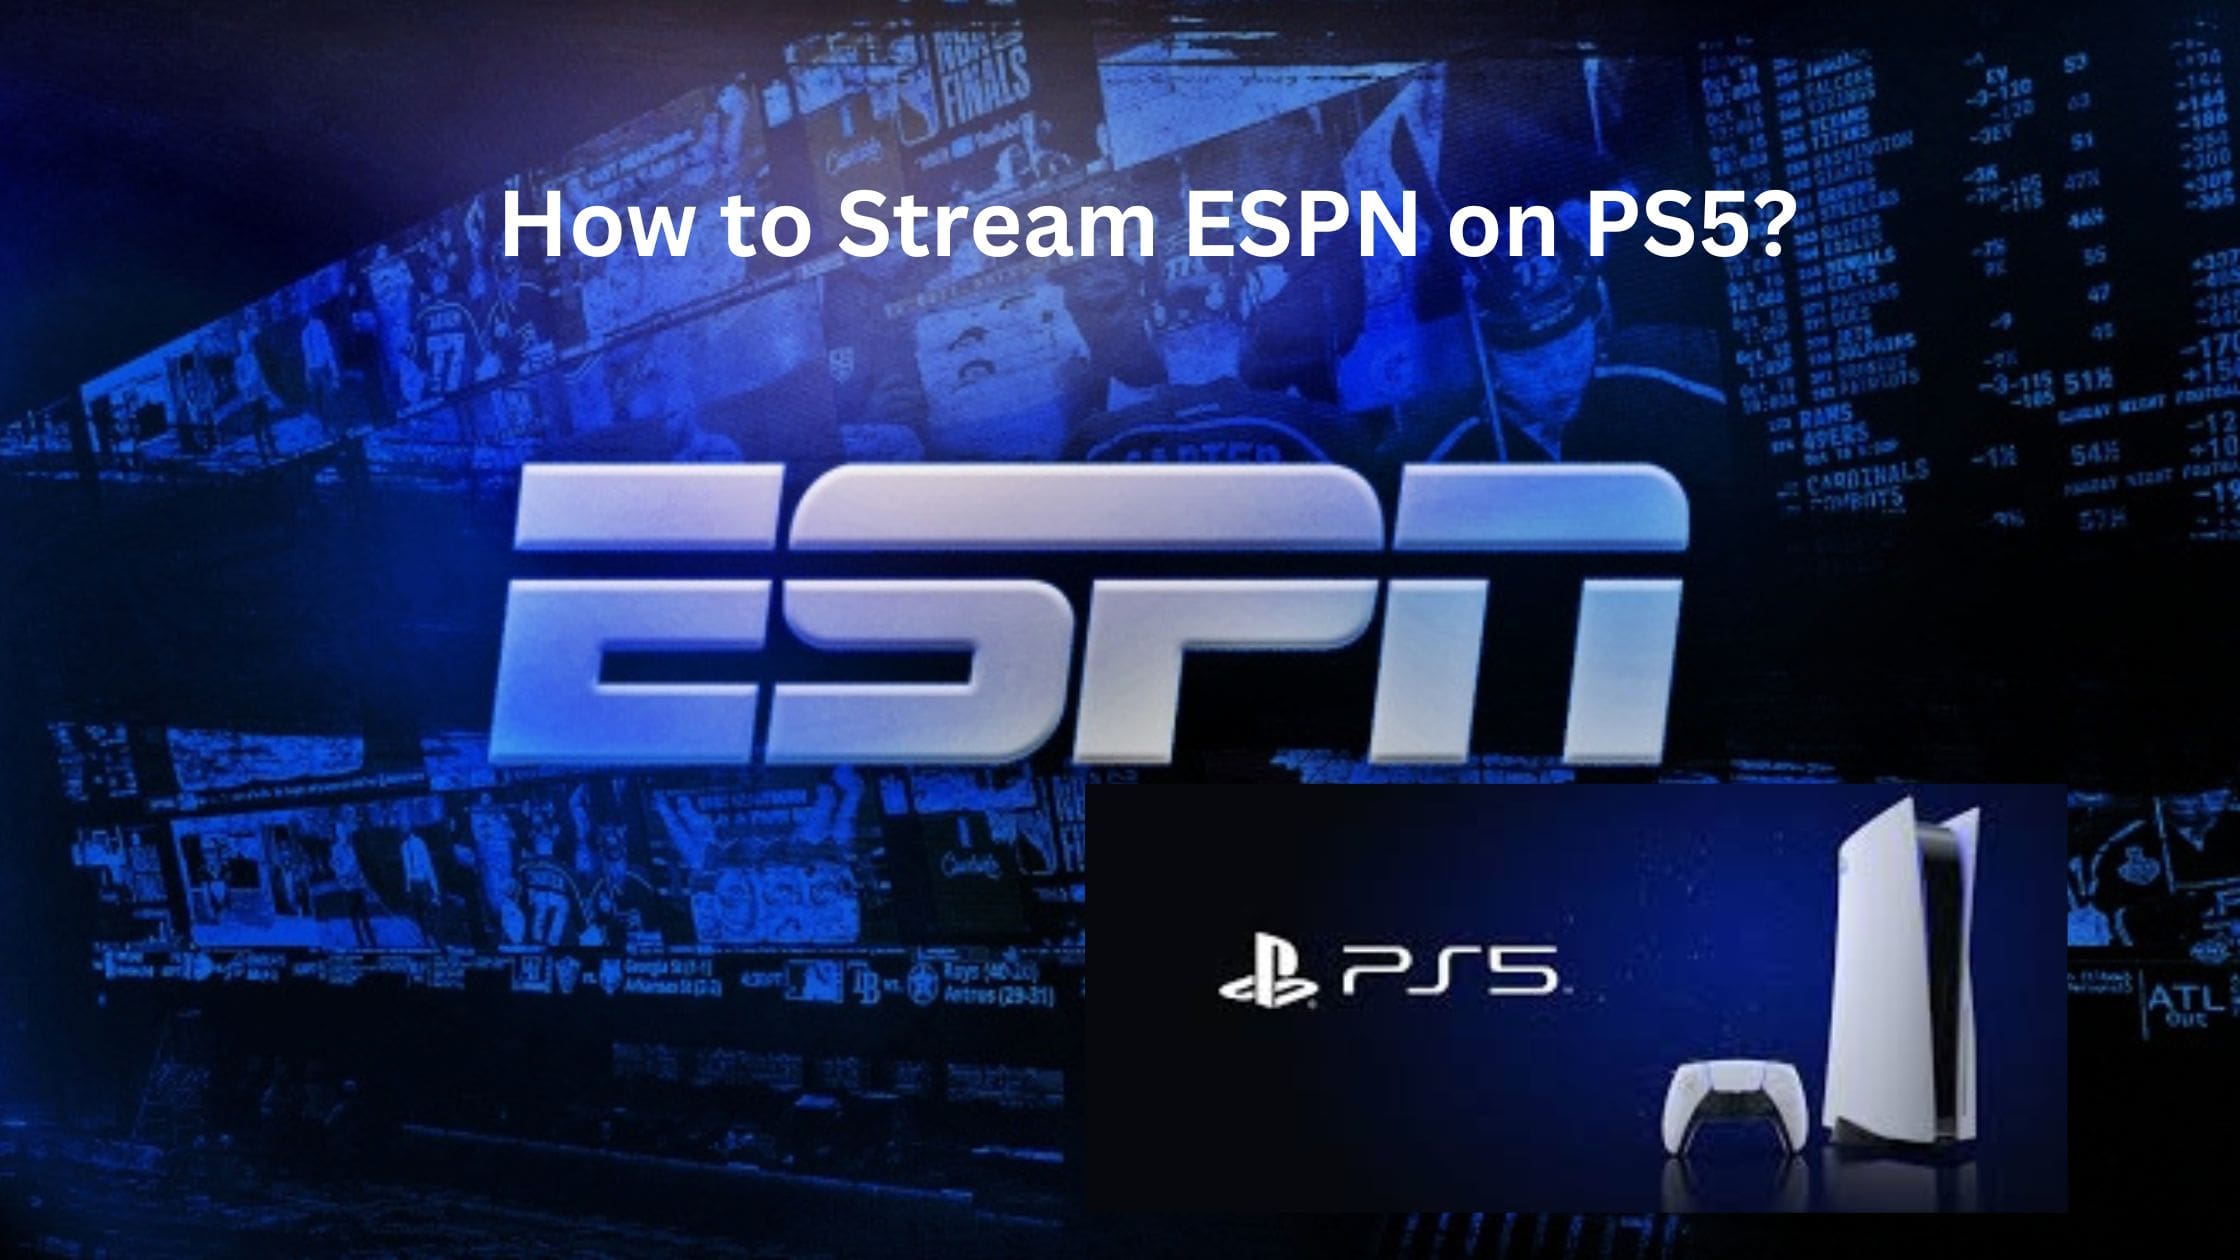 How to Stream ESPN on PS 5?